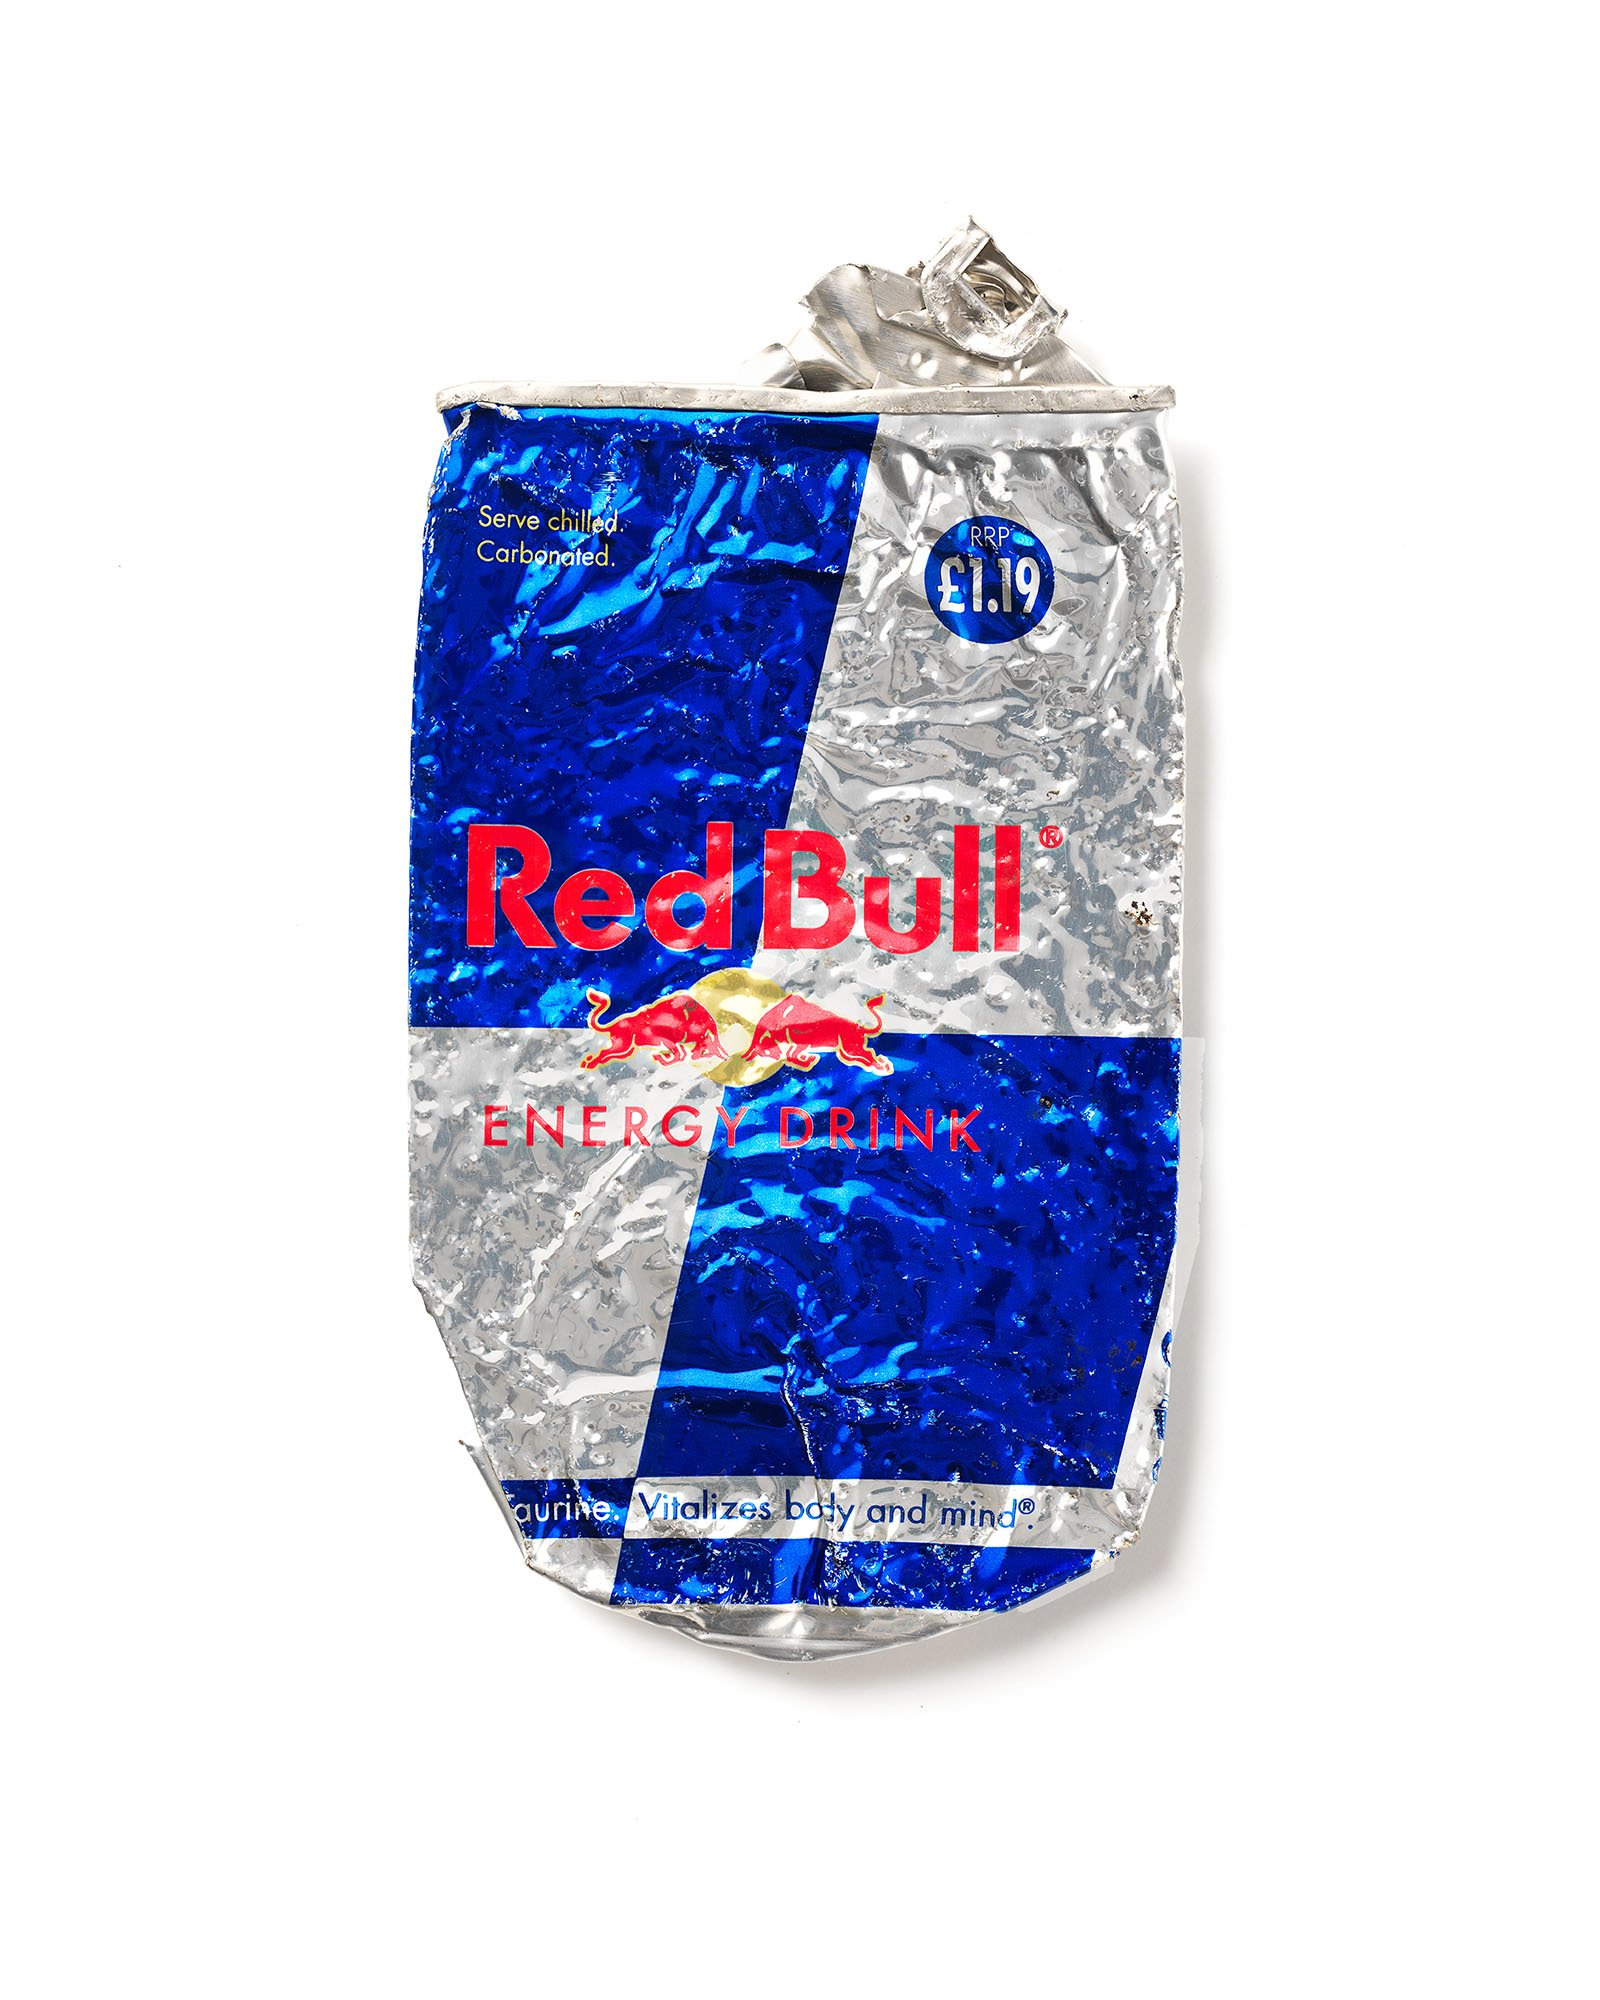 RED BULL serve chilled